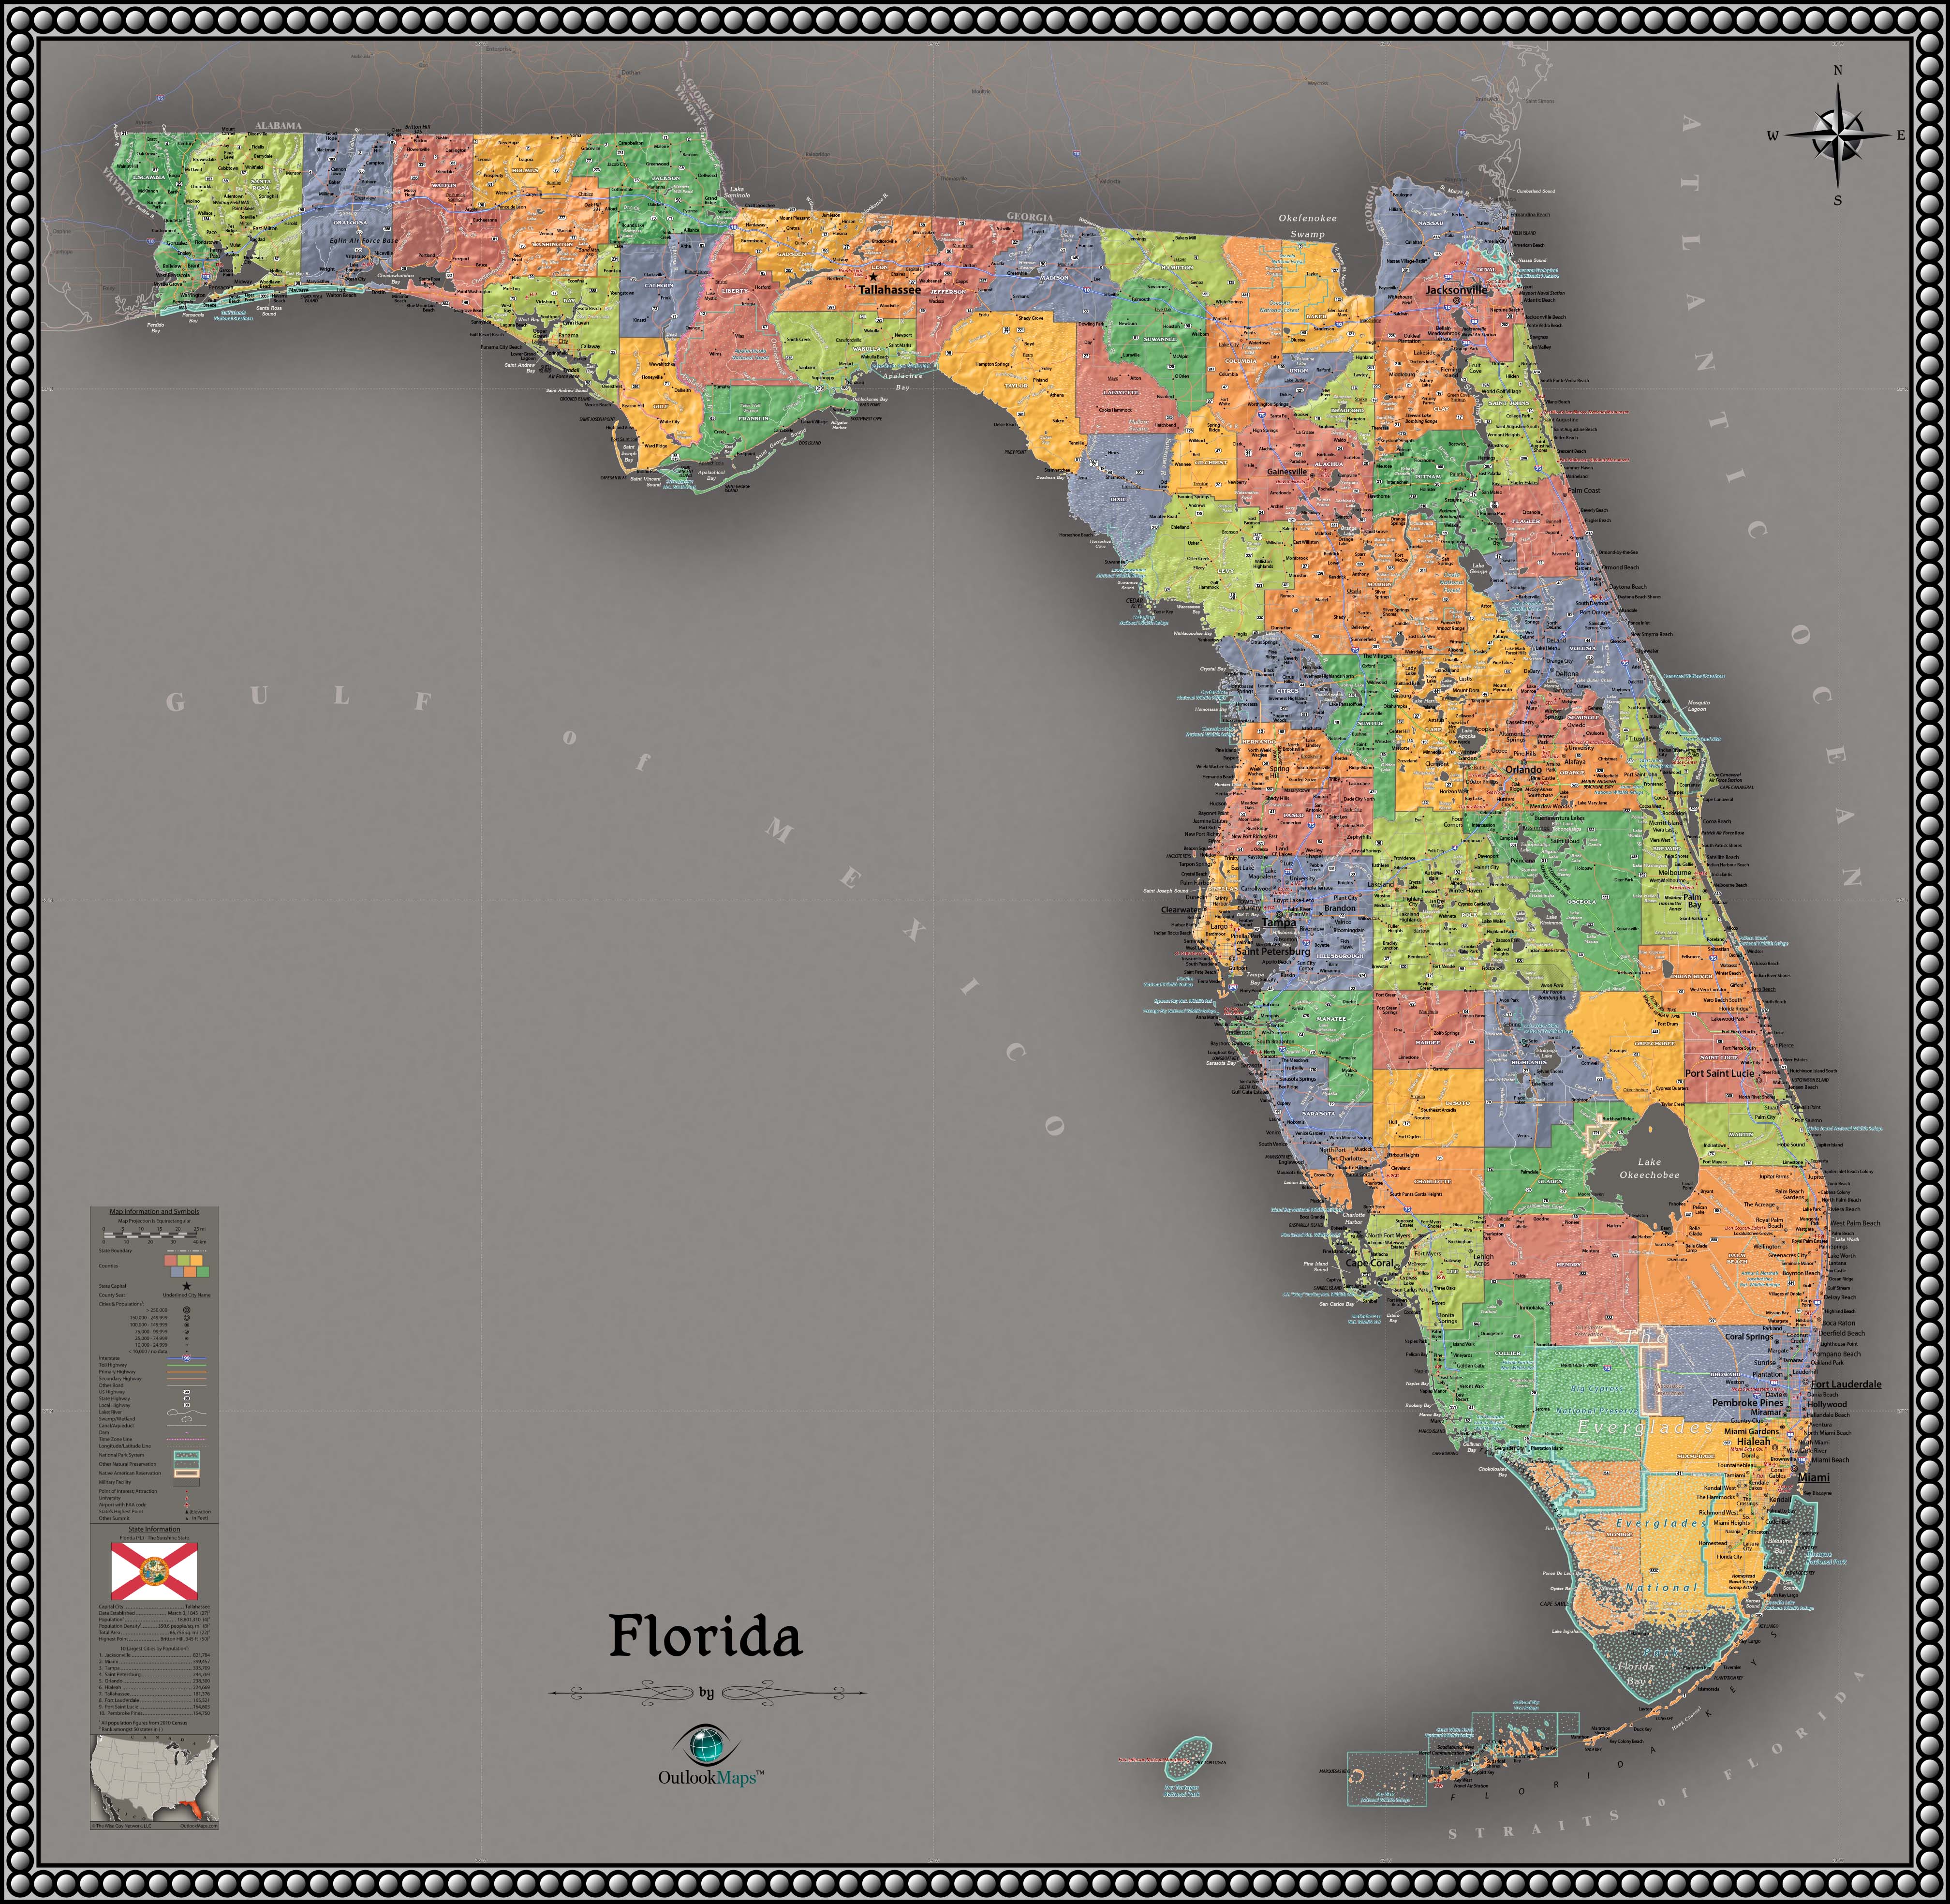 Florida Contemporary Wall Map By Outlook Maps Mapsales 7438